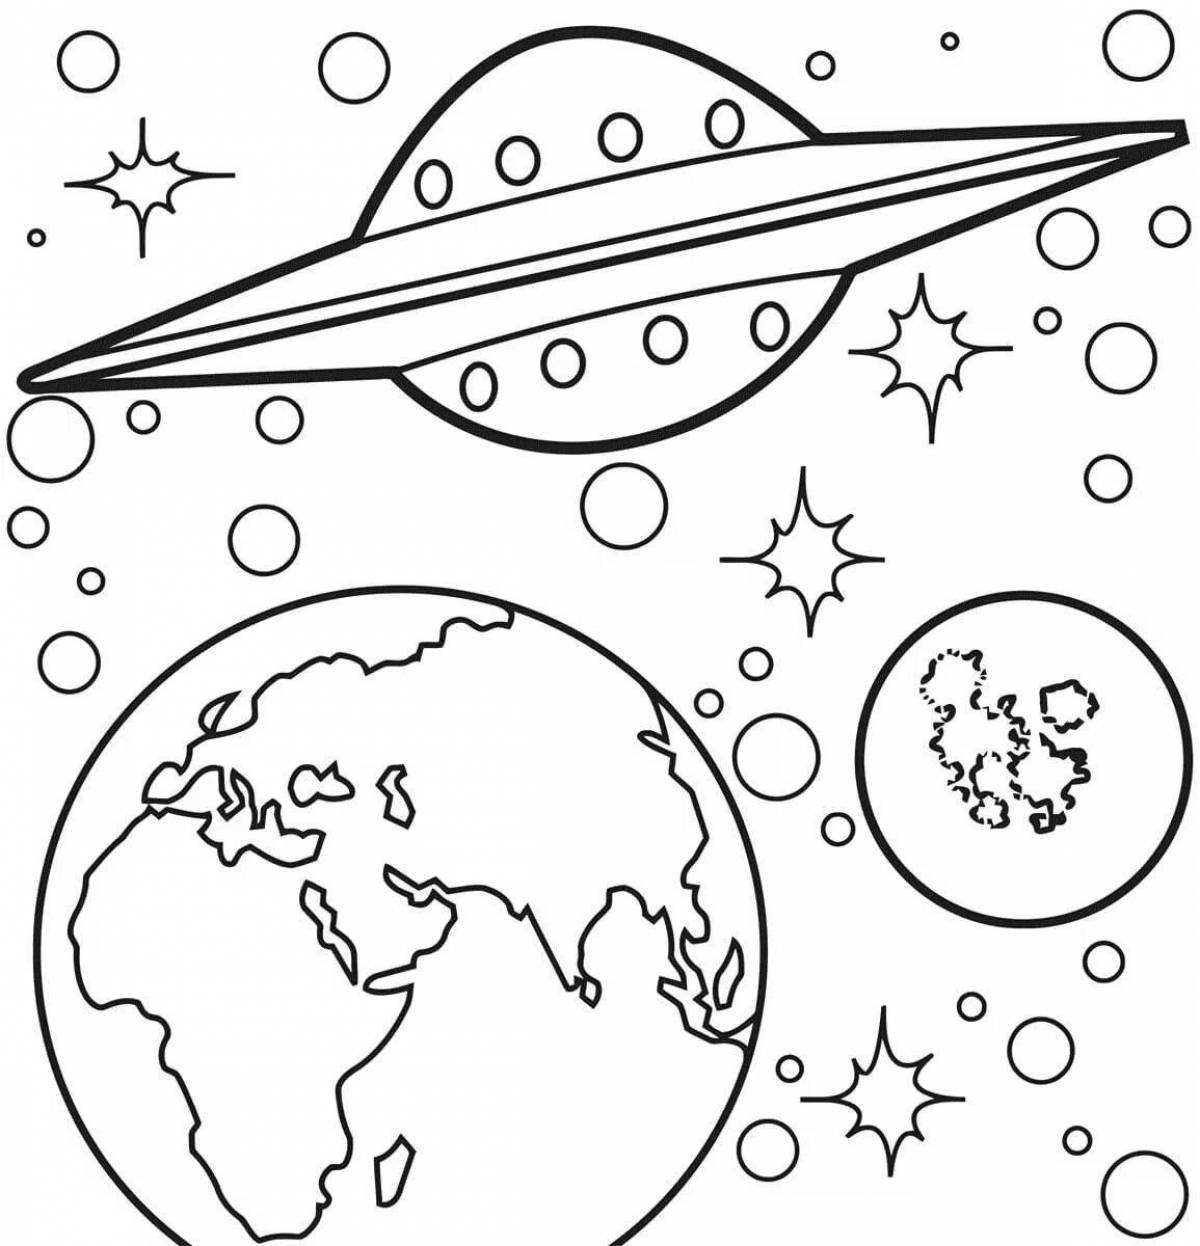 Coloring book cheerful day of astronautics